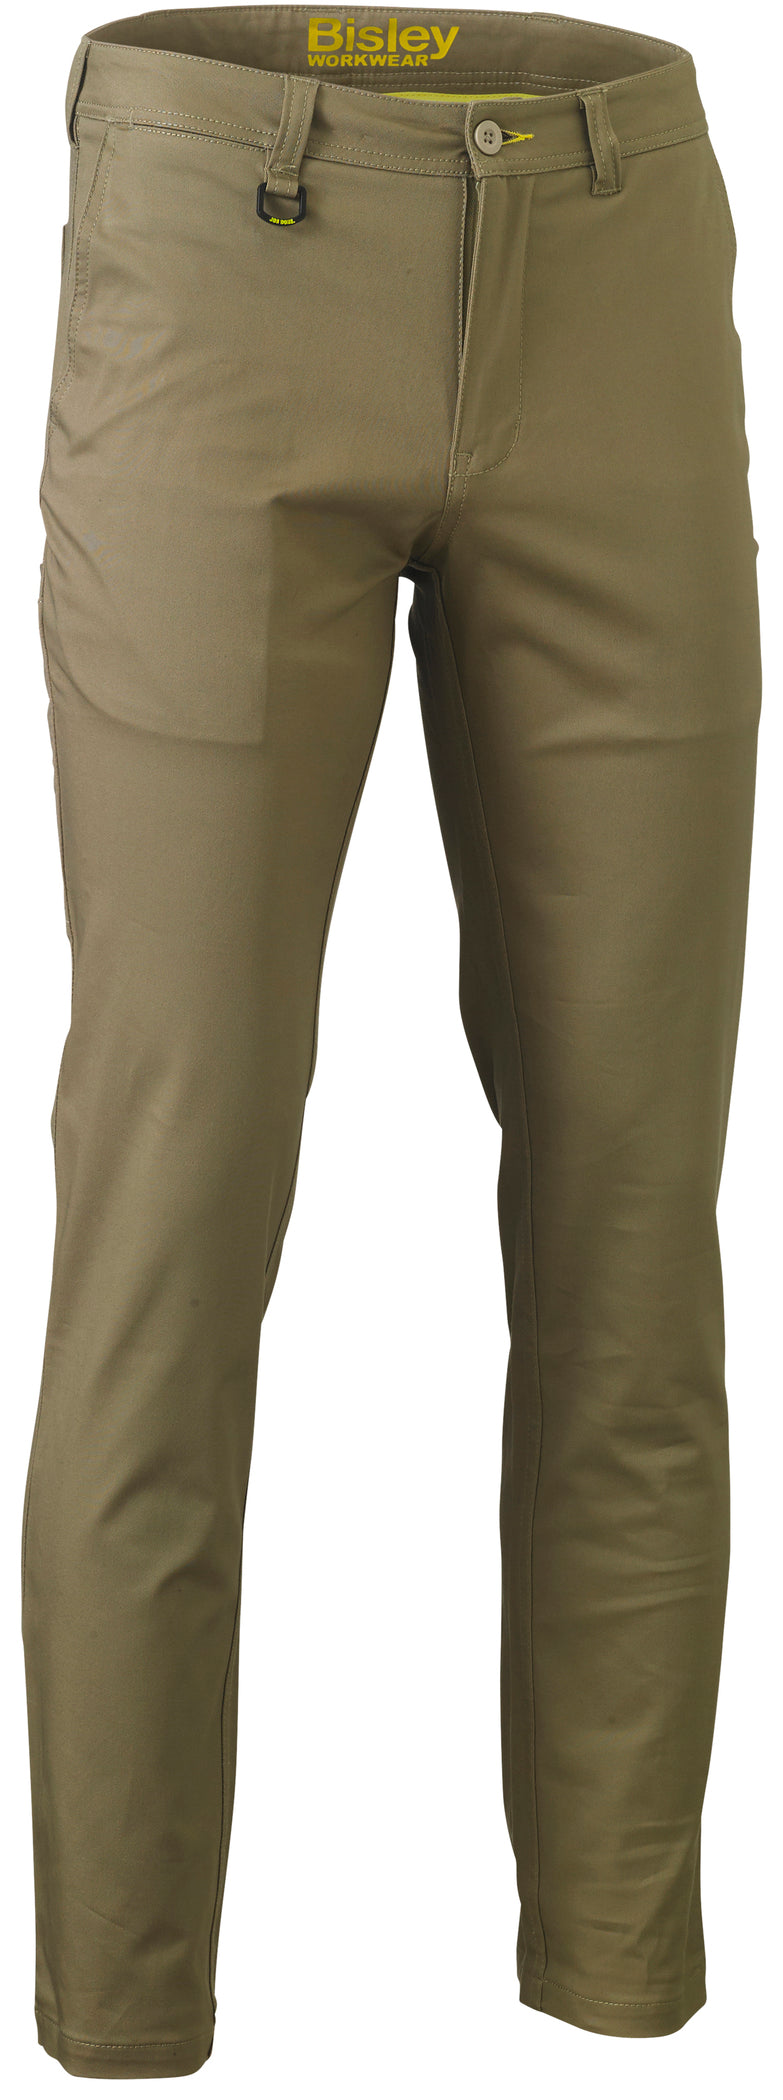 Load image into Gallery viewer, Wholesale BP6008 Bisley Stretch Cotton Drill Work Pants - Regular Printed or Blank
